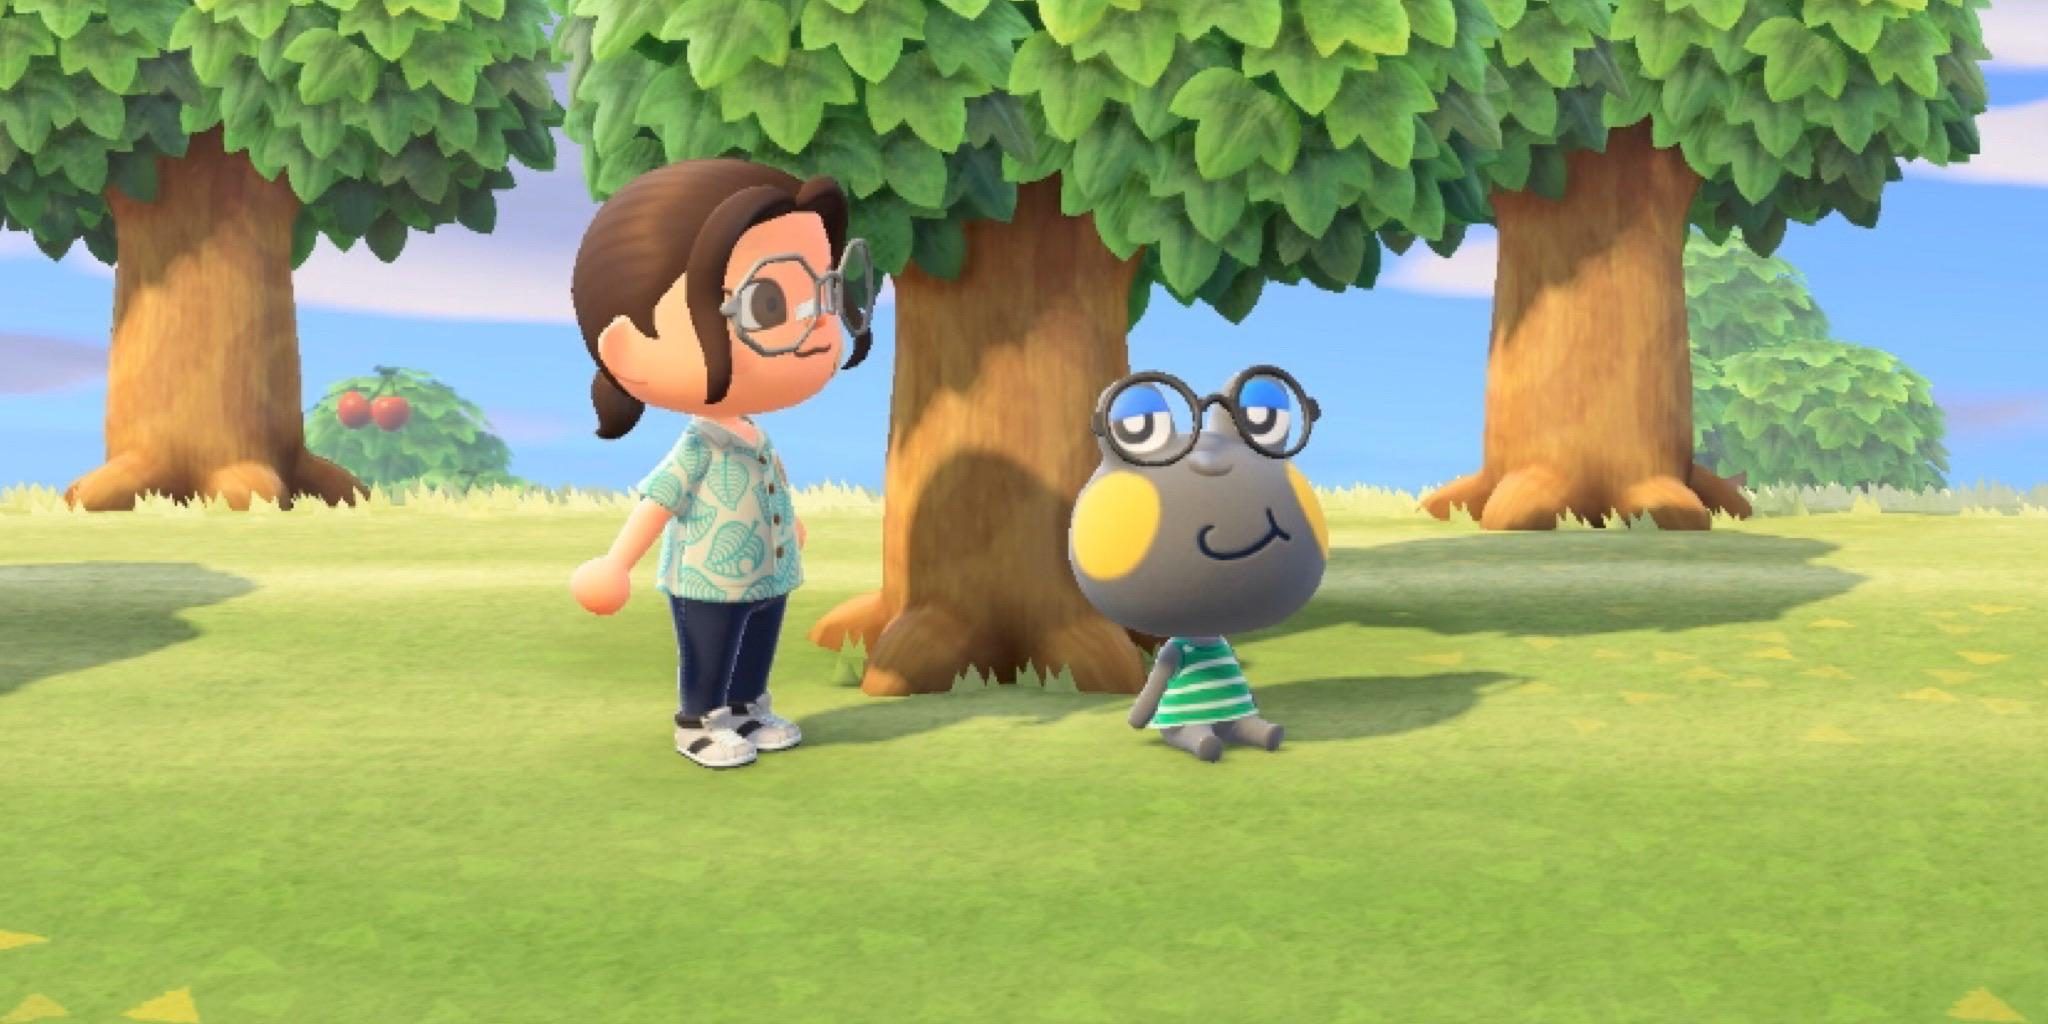 Huck looks up at a villager while sitting under a tree